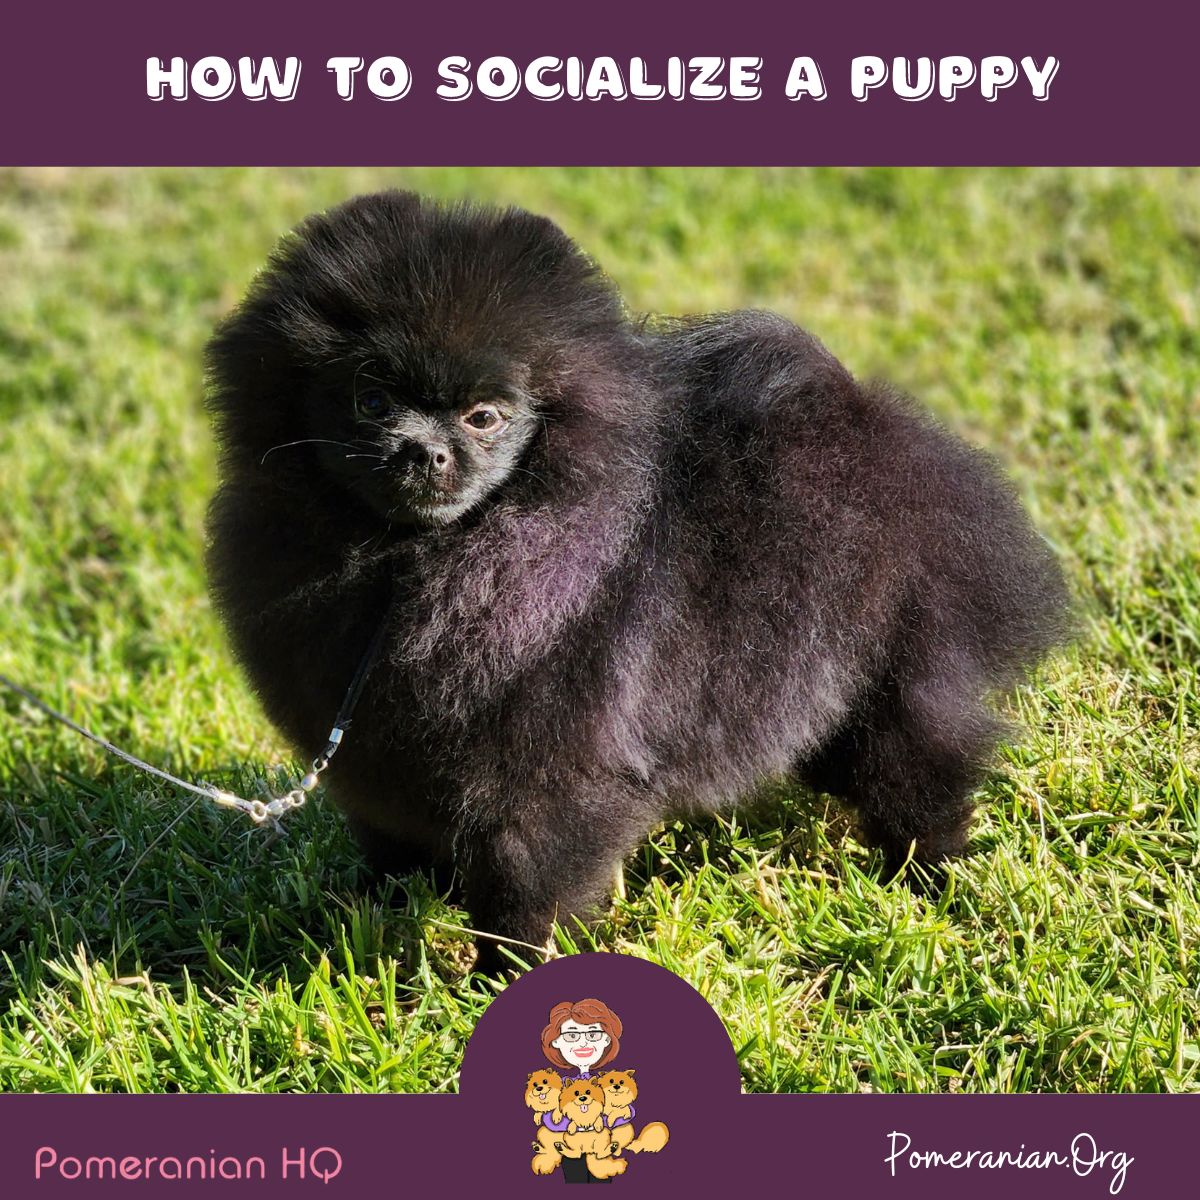 How to Socialize a Puppy